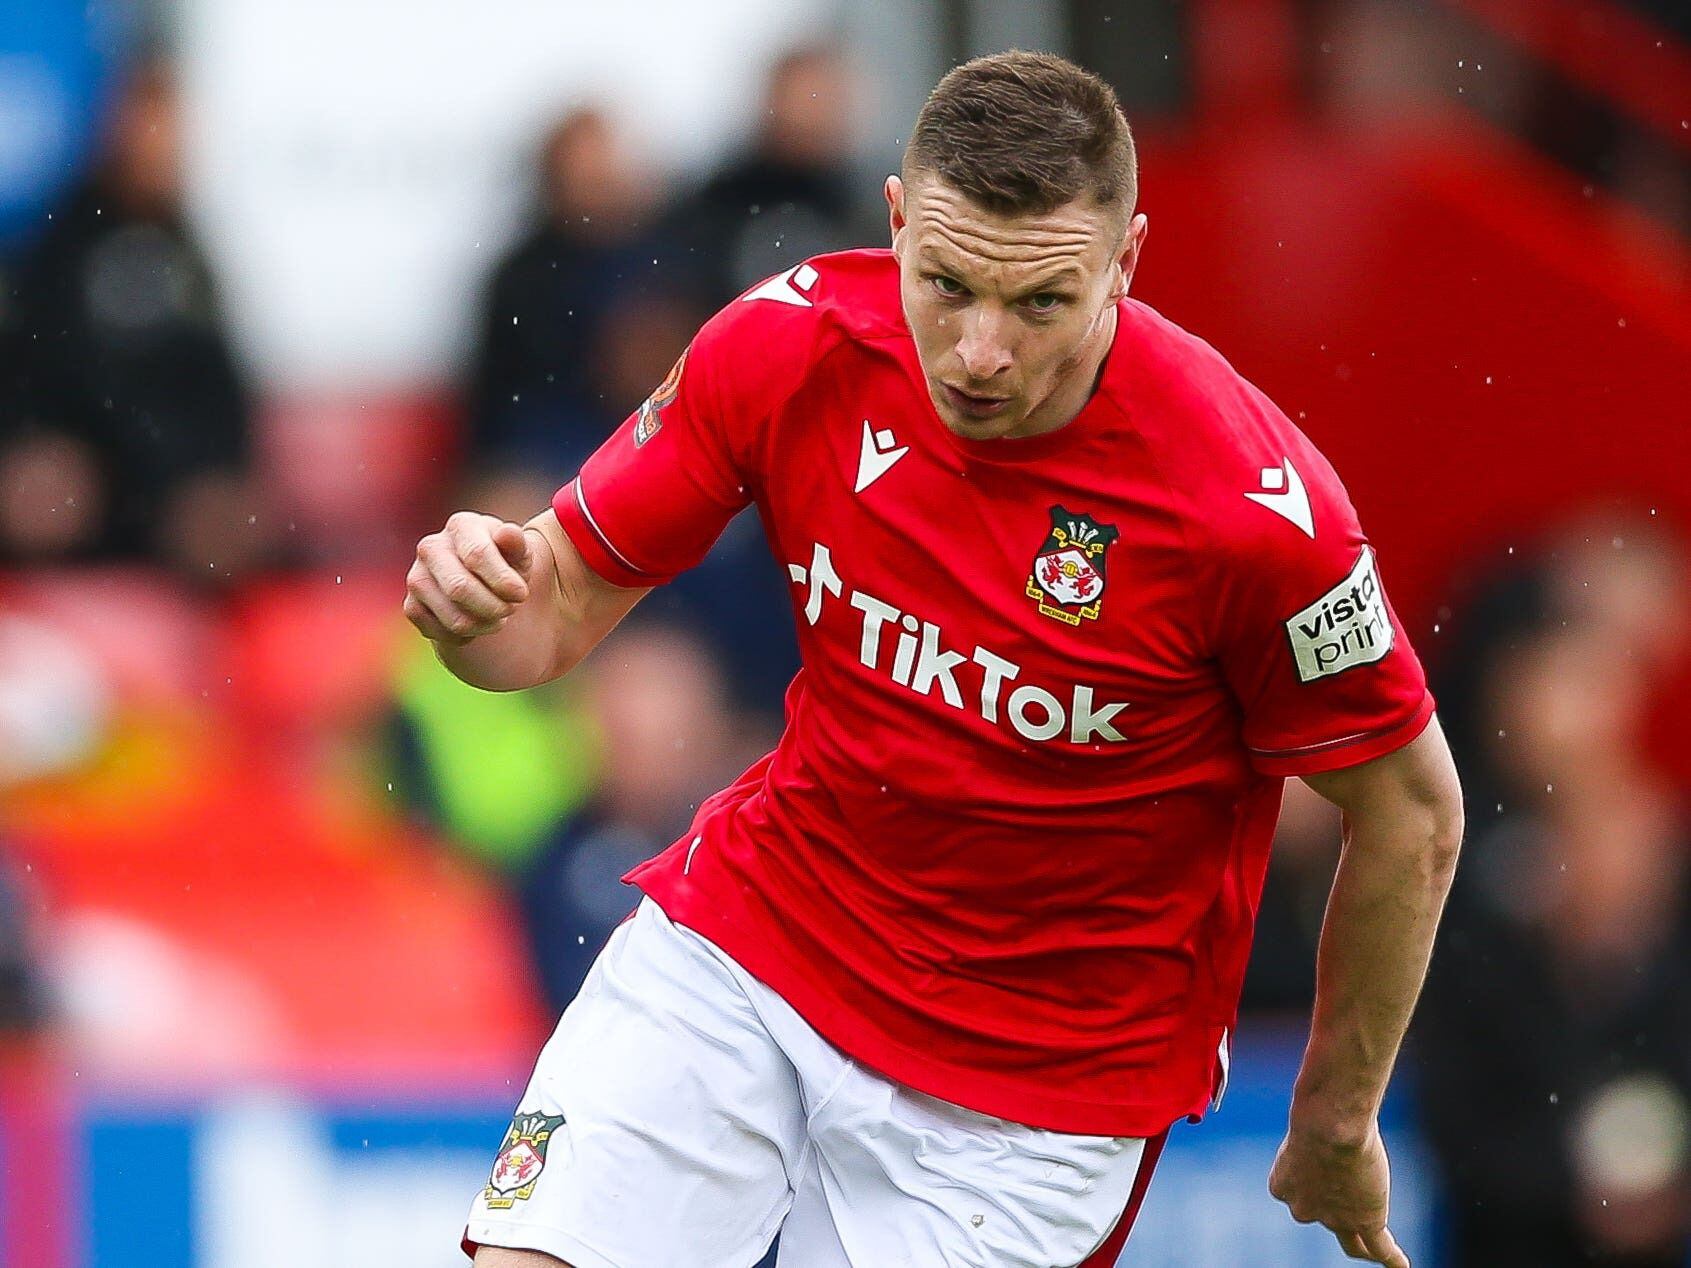 Wrexham striker Paul Mullin to convalesce at club co-owner Rob McElhenney’s home